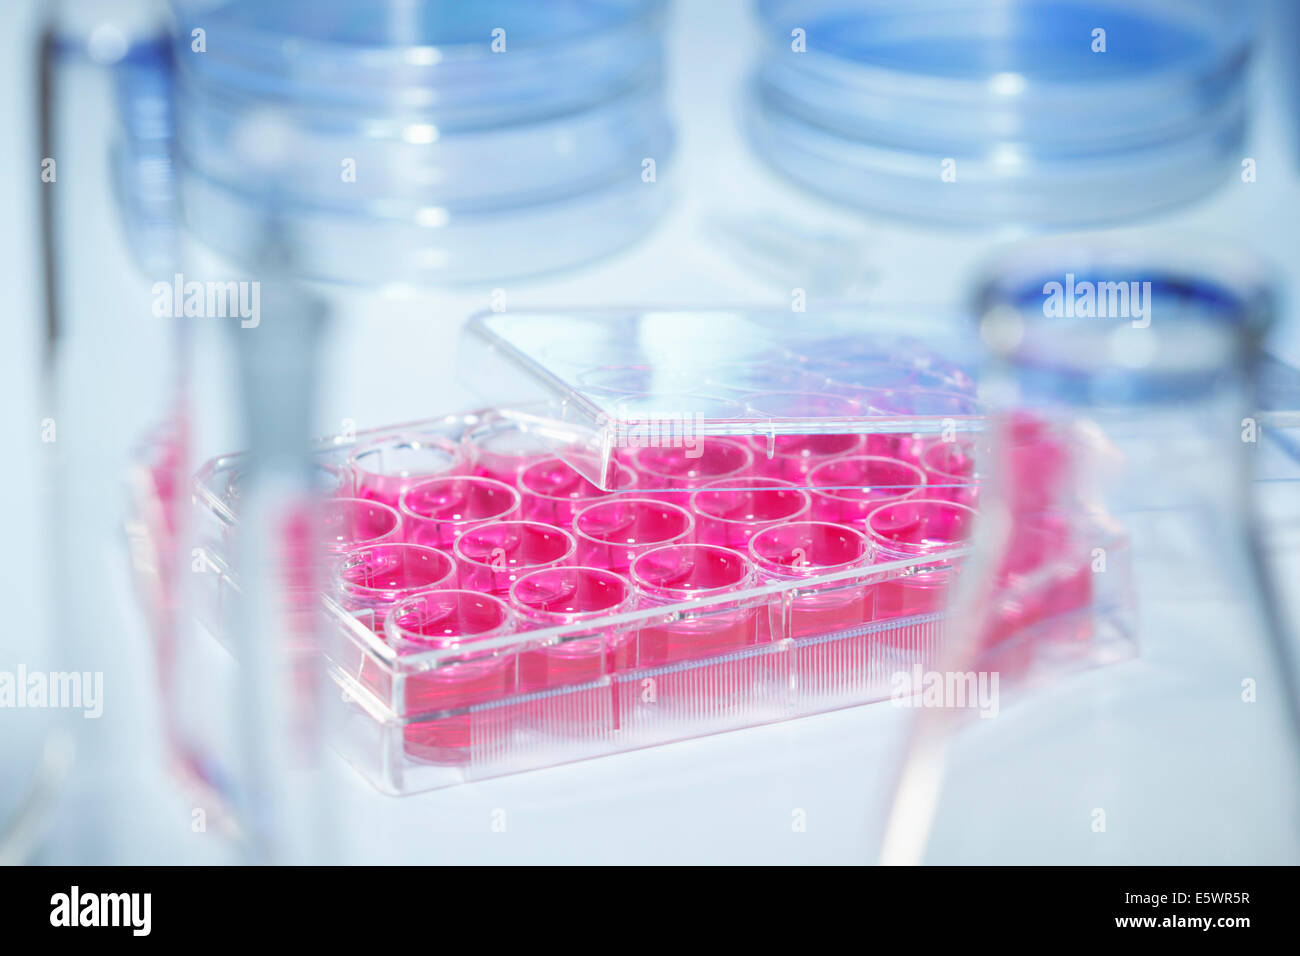 Multiwell plate containing cell culture medium (DMEM) surrounded by laboratory flasks Stock Photo